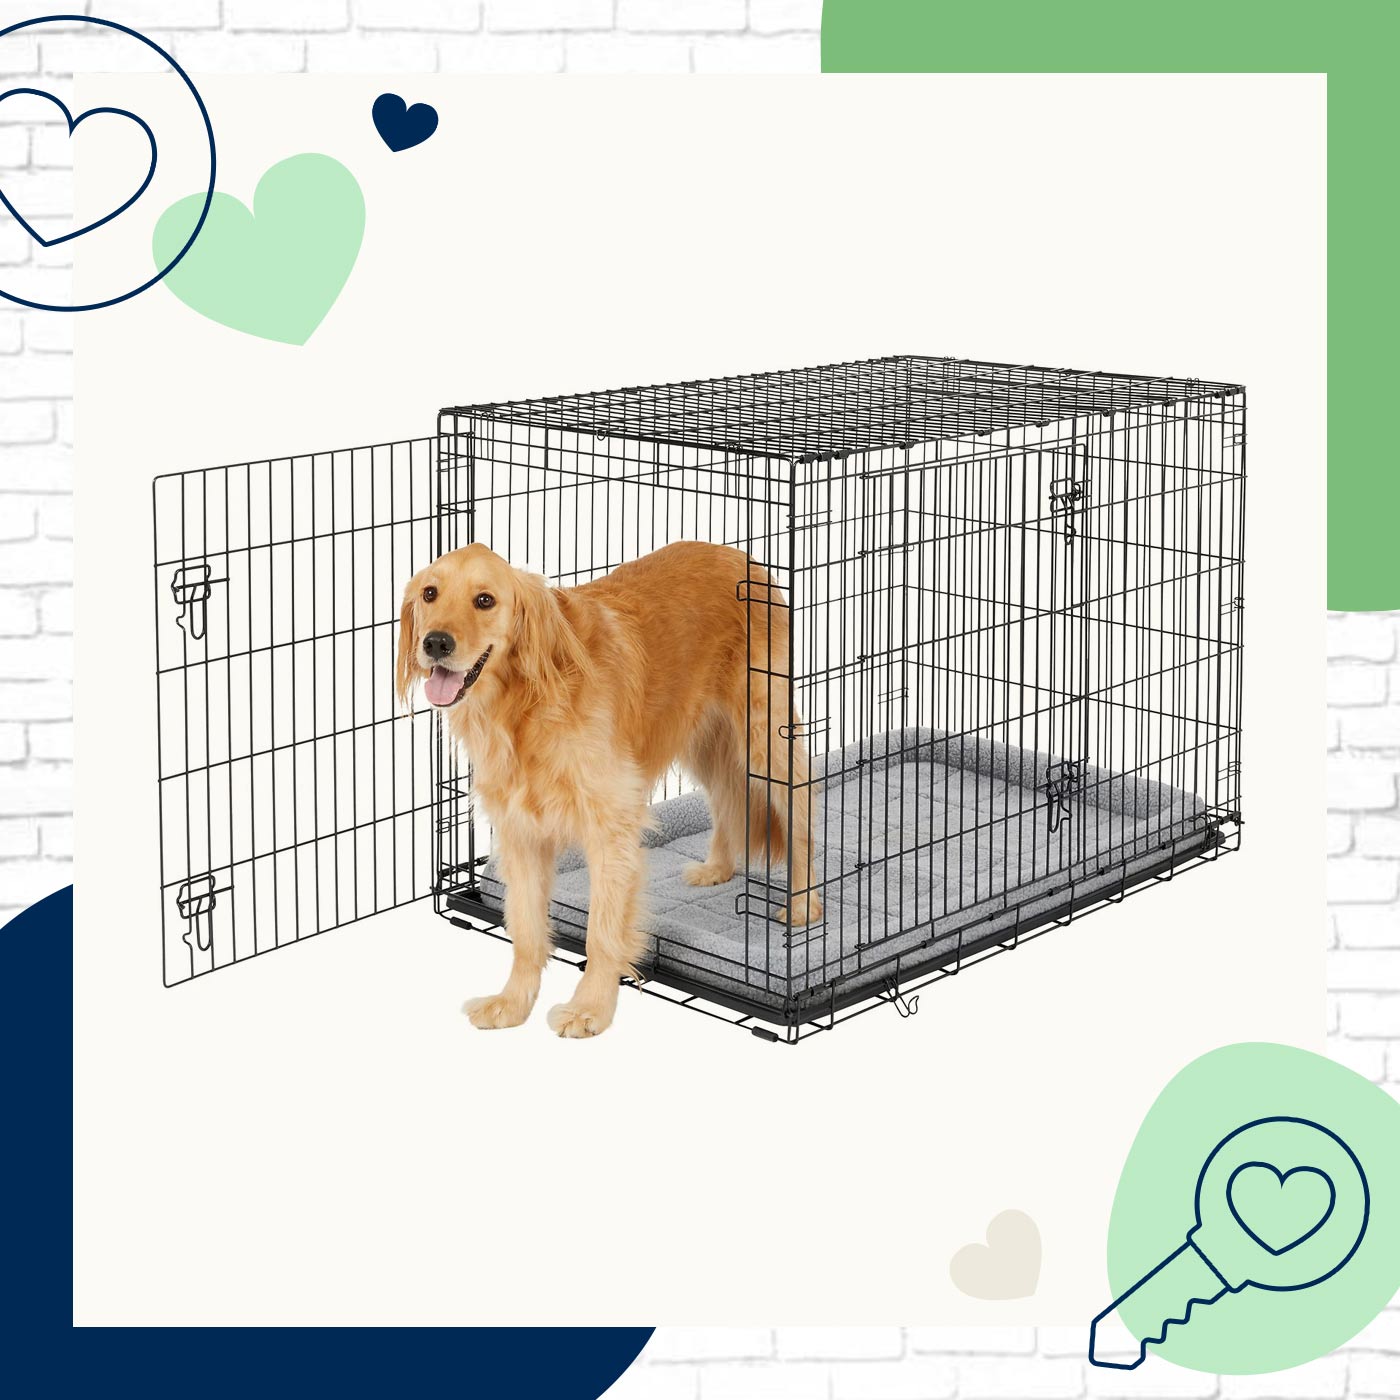 https://media-be.chewy.com/wp-content/uploads/2020/04/17092223/best-dog-crate-212618.jpg